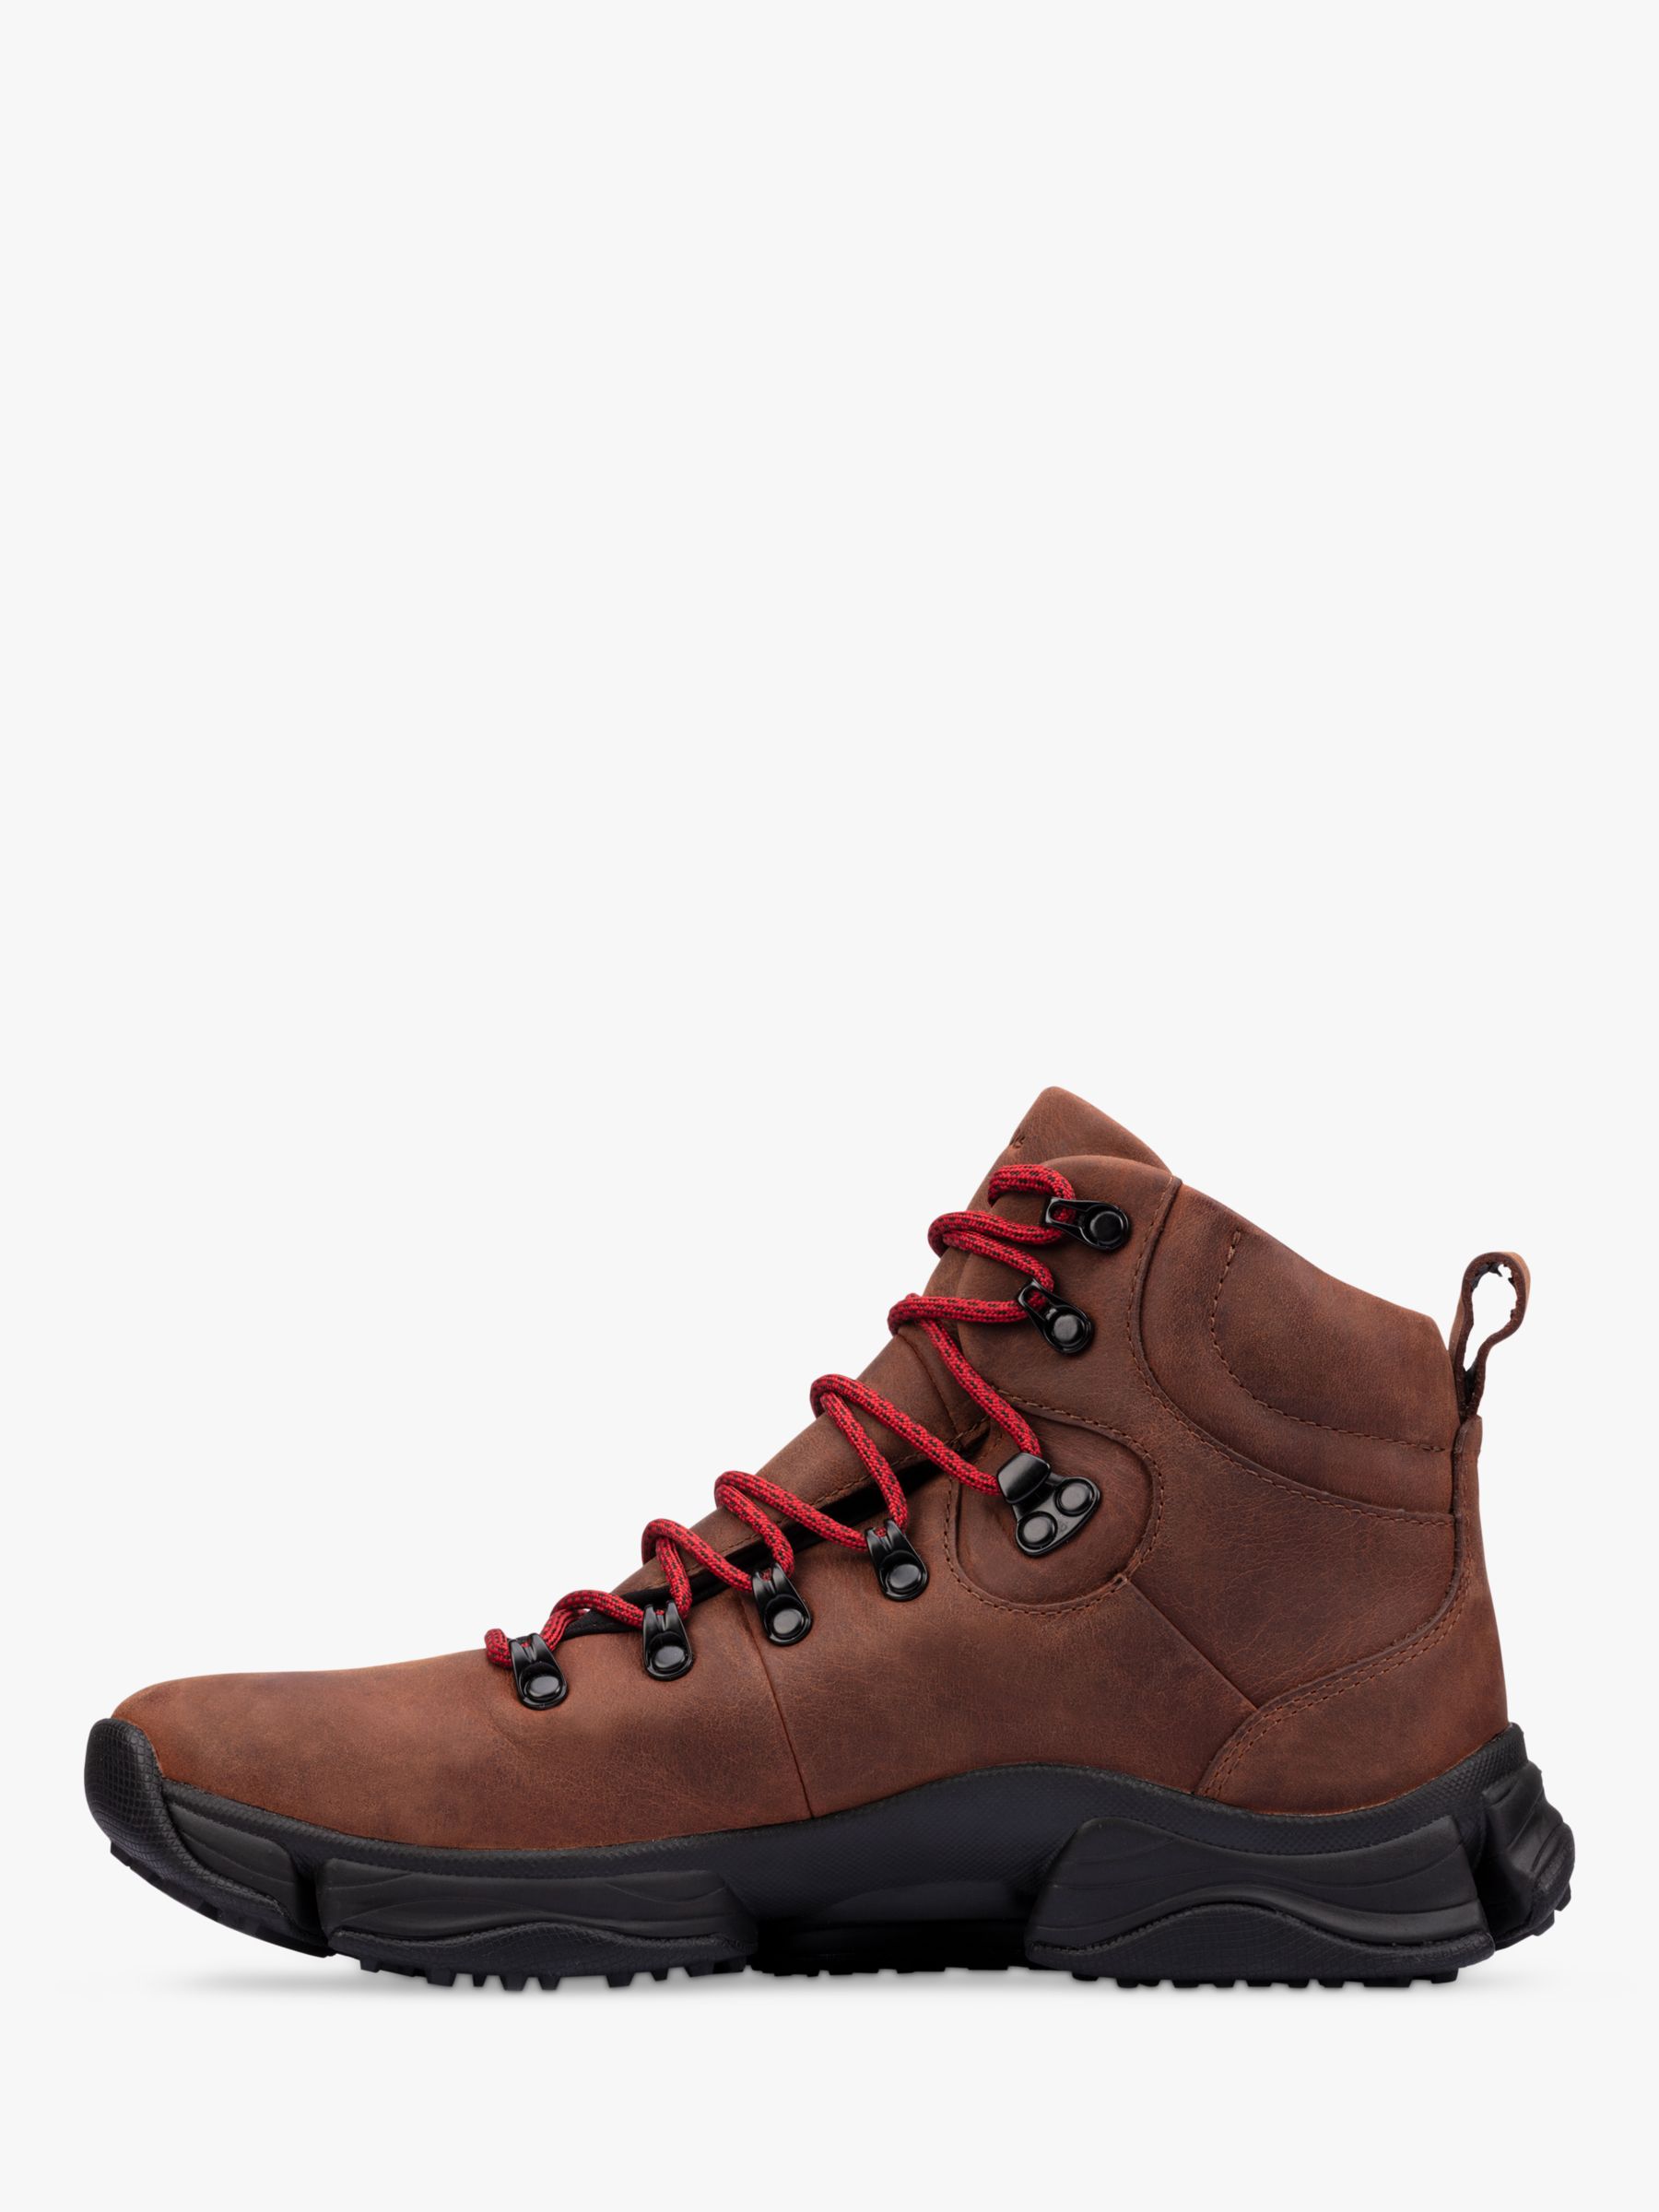 clarks hiking boots